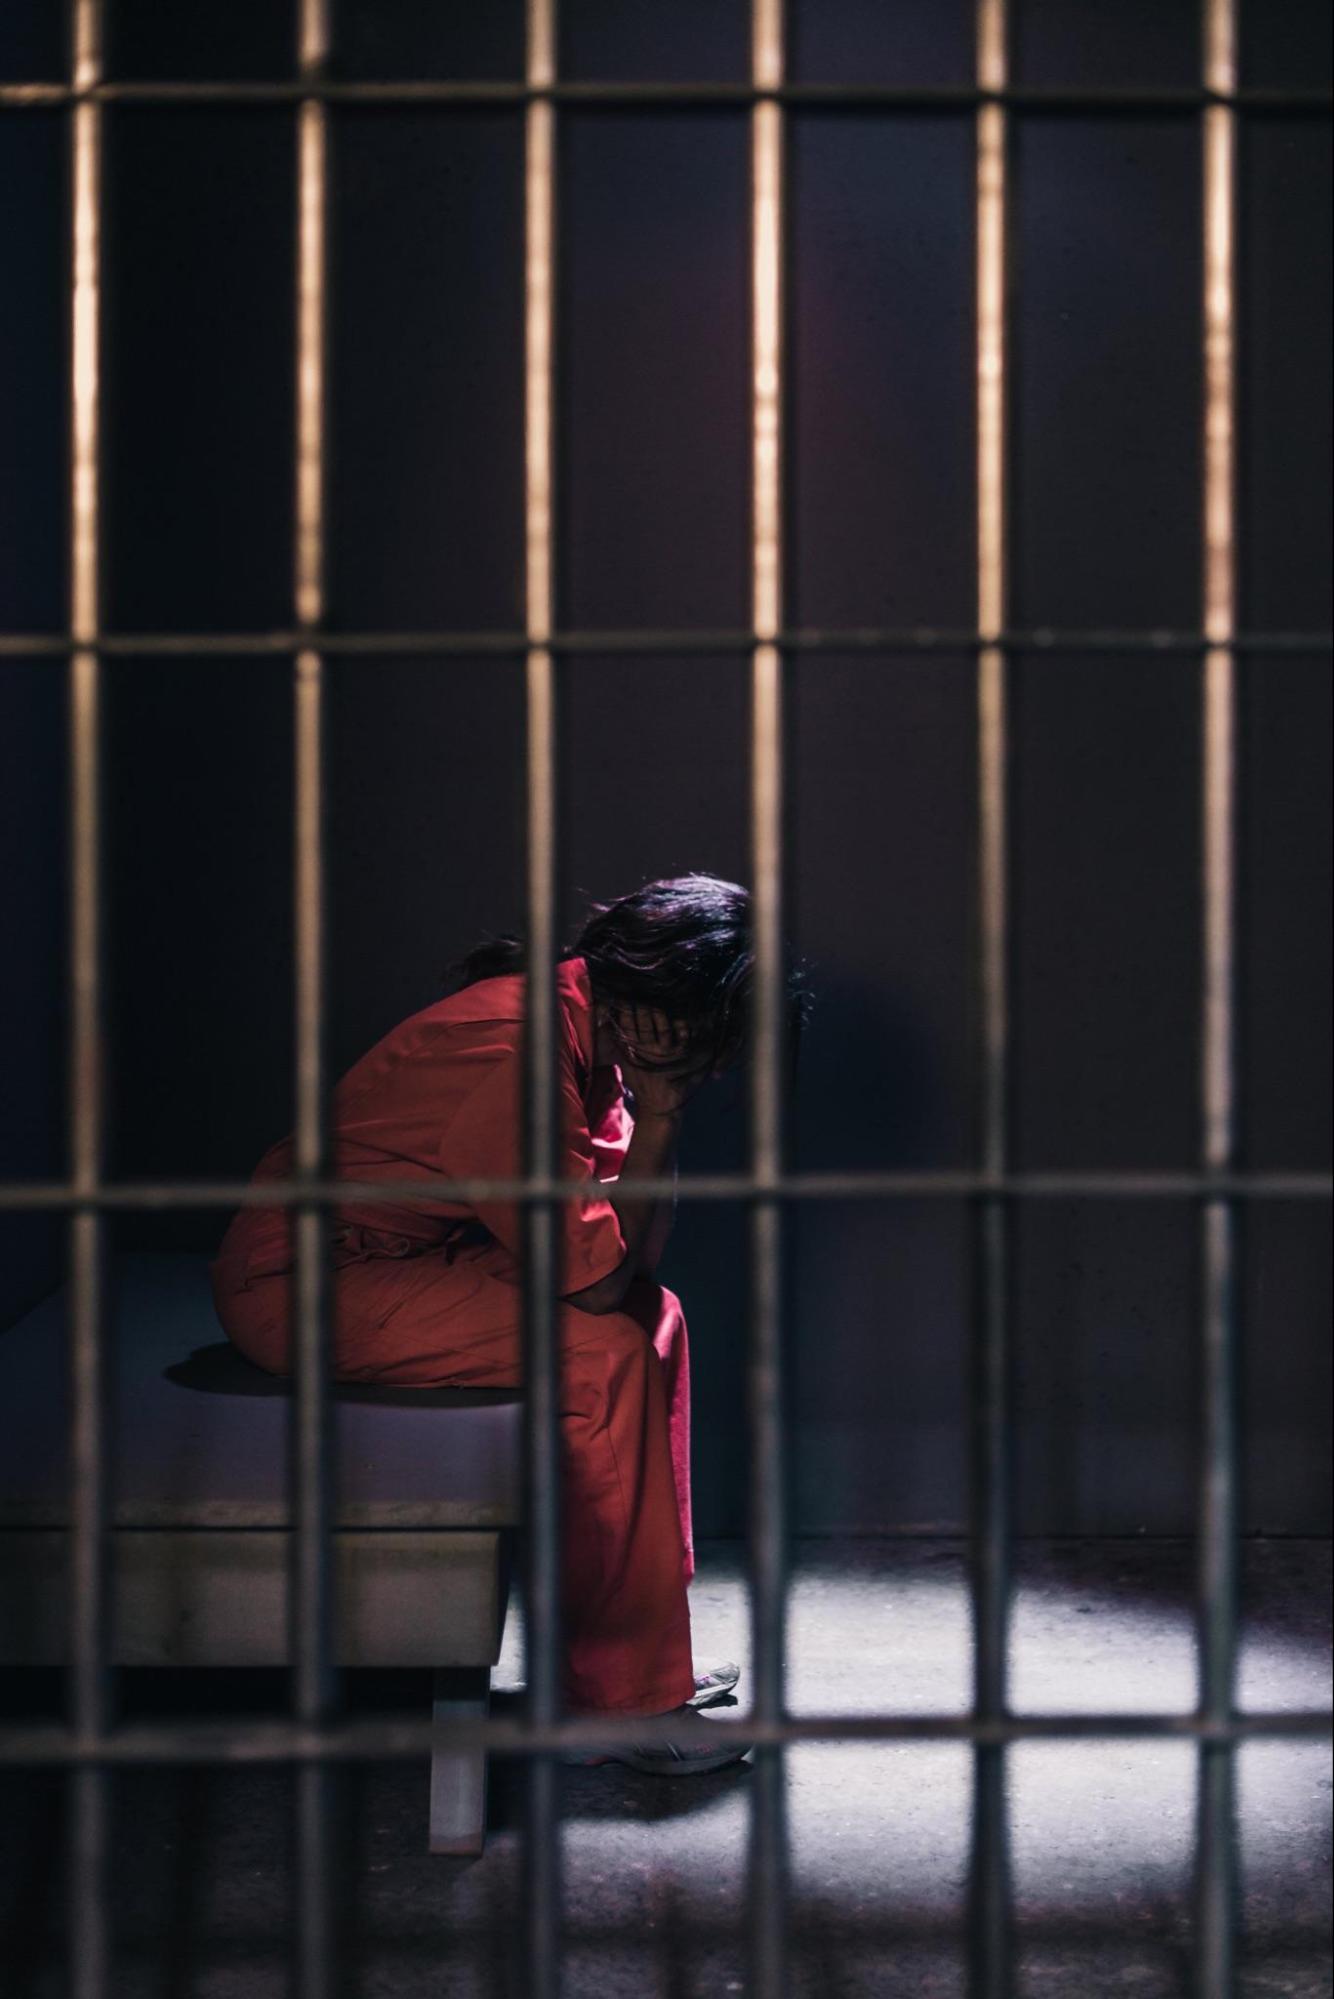 A person sitting in a jail cell